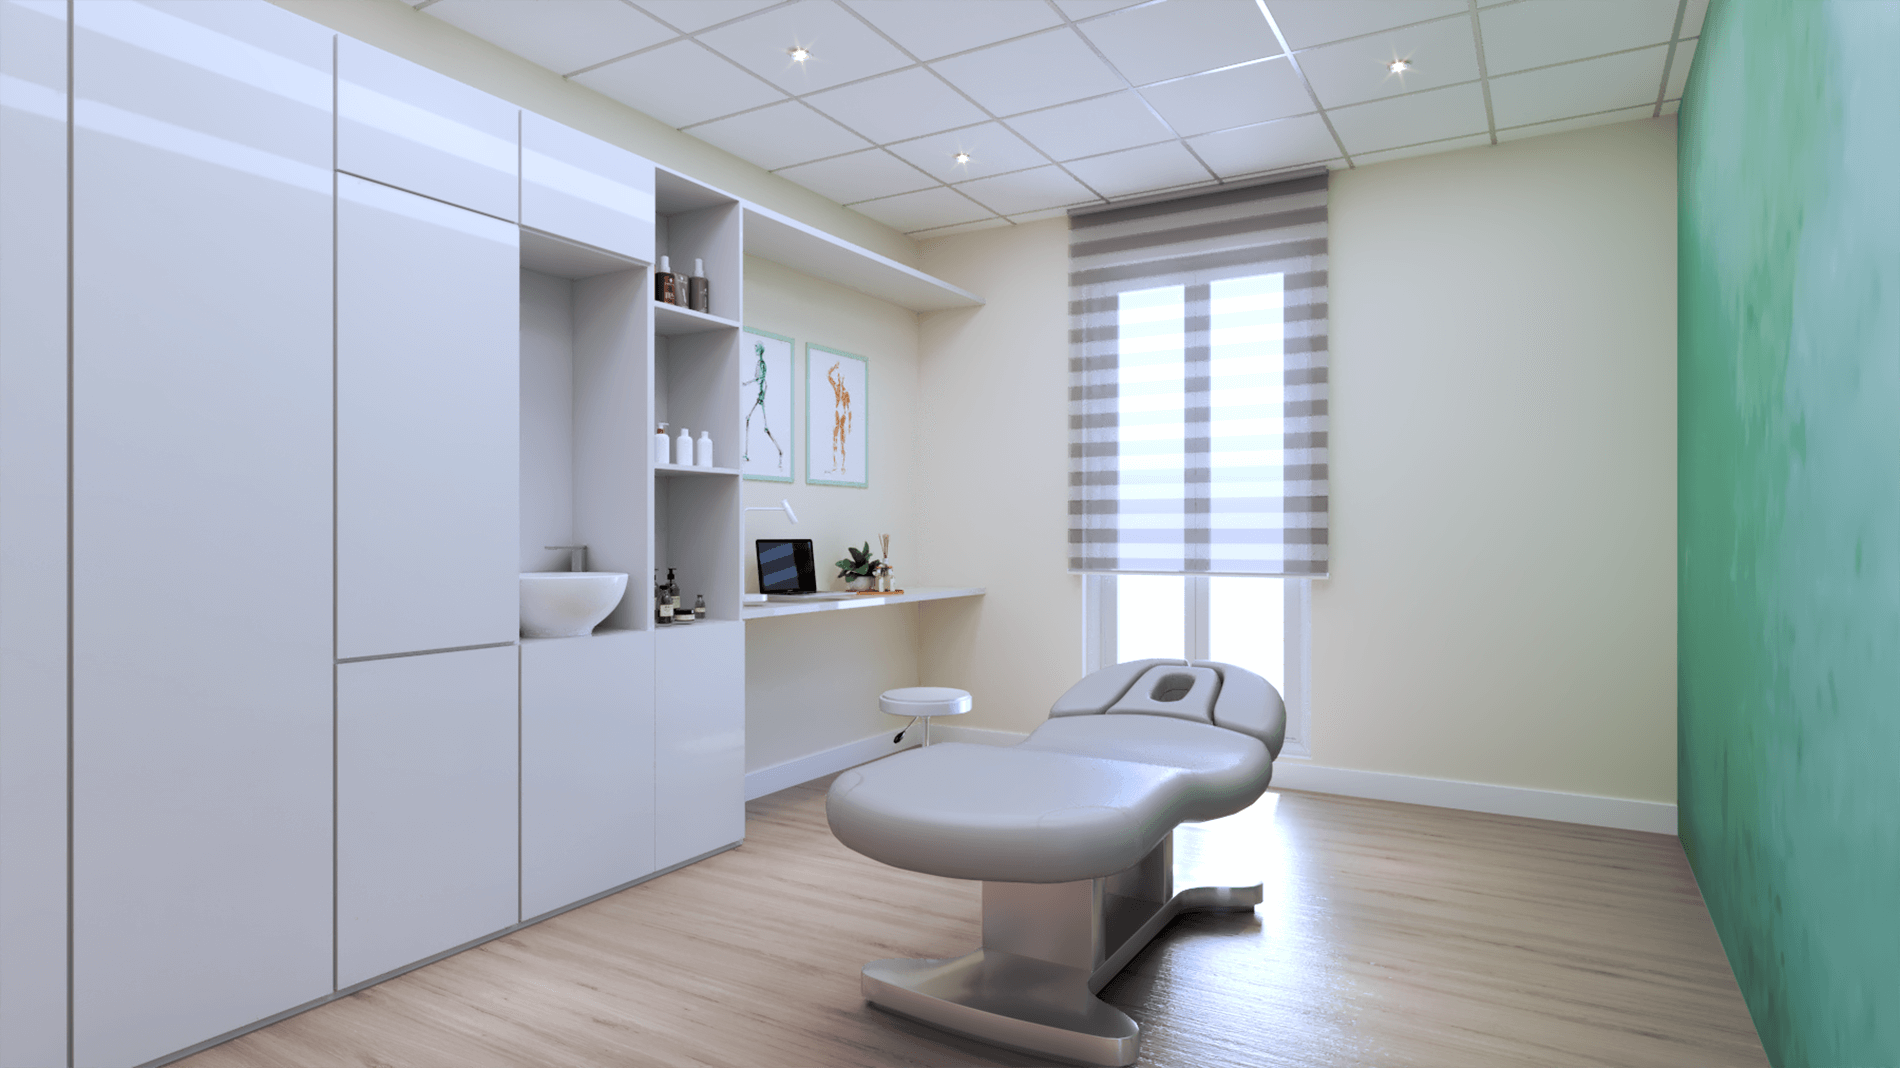 Wellness clinic secondary therapy room with a therapy bed in the middle, designed by Beatrice Leupold